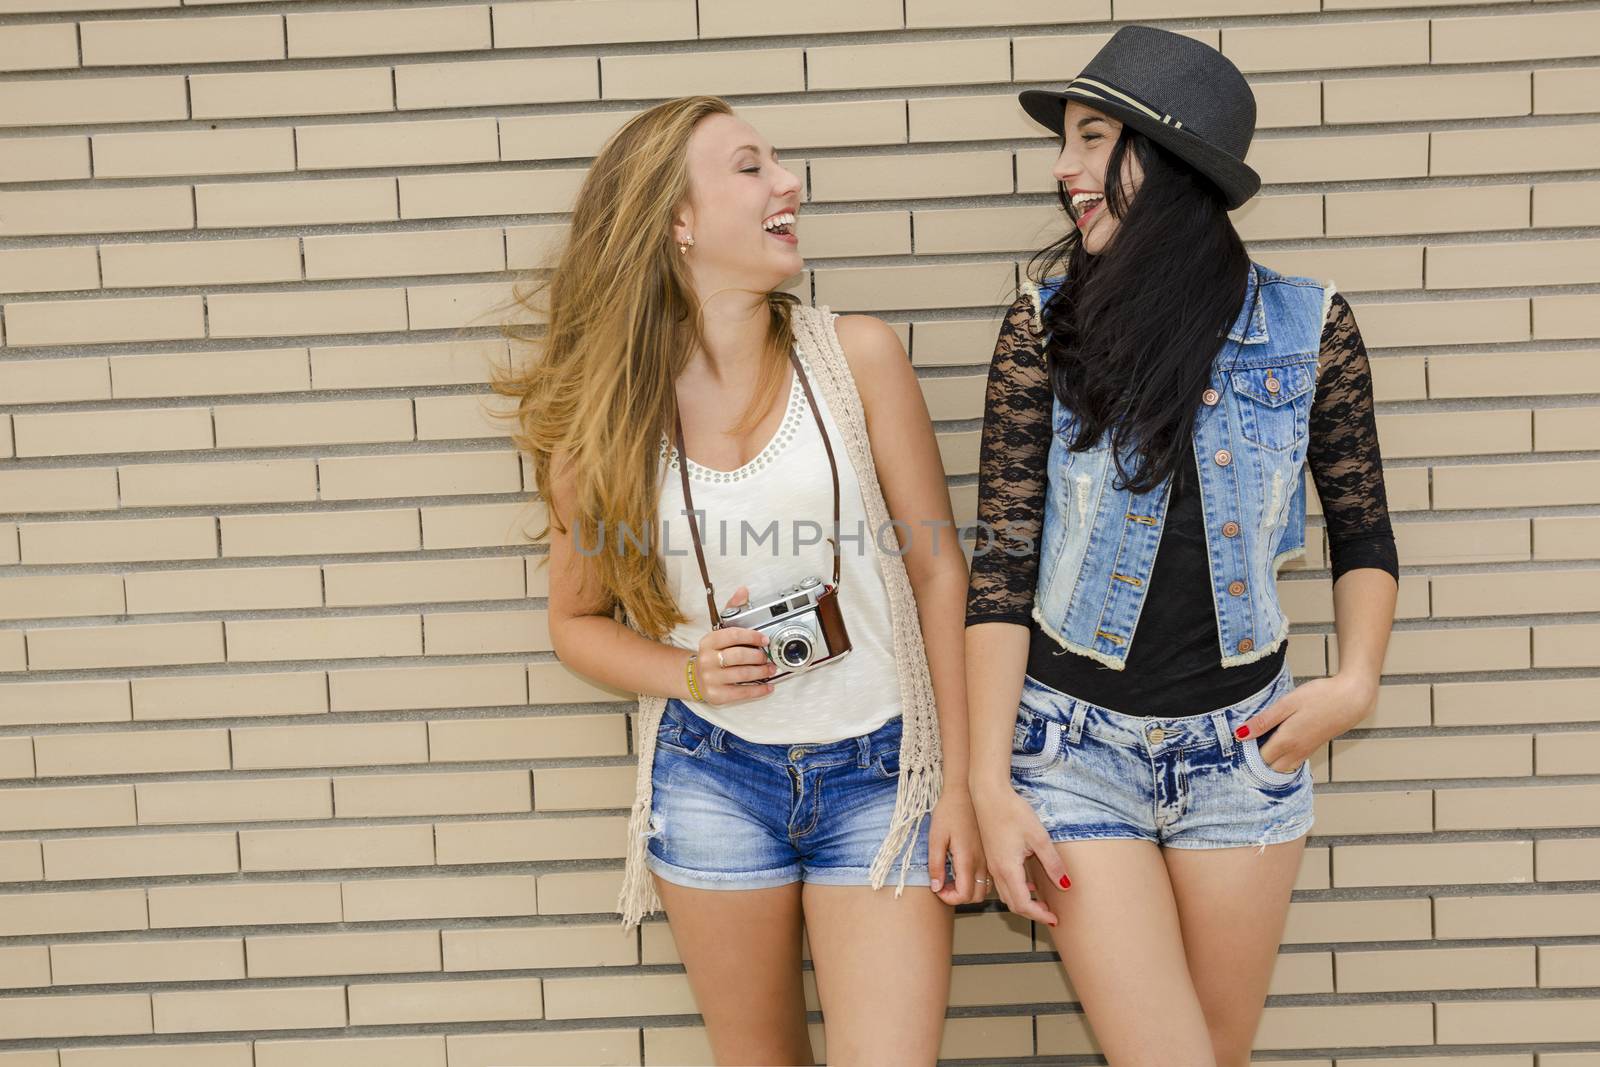 Two beautiful and young girlfriends having fun, in front of a brick wall